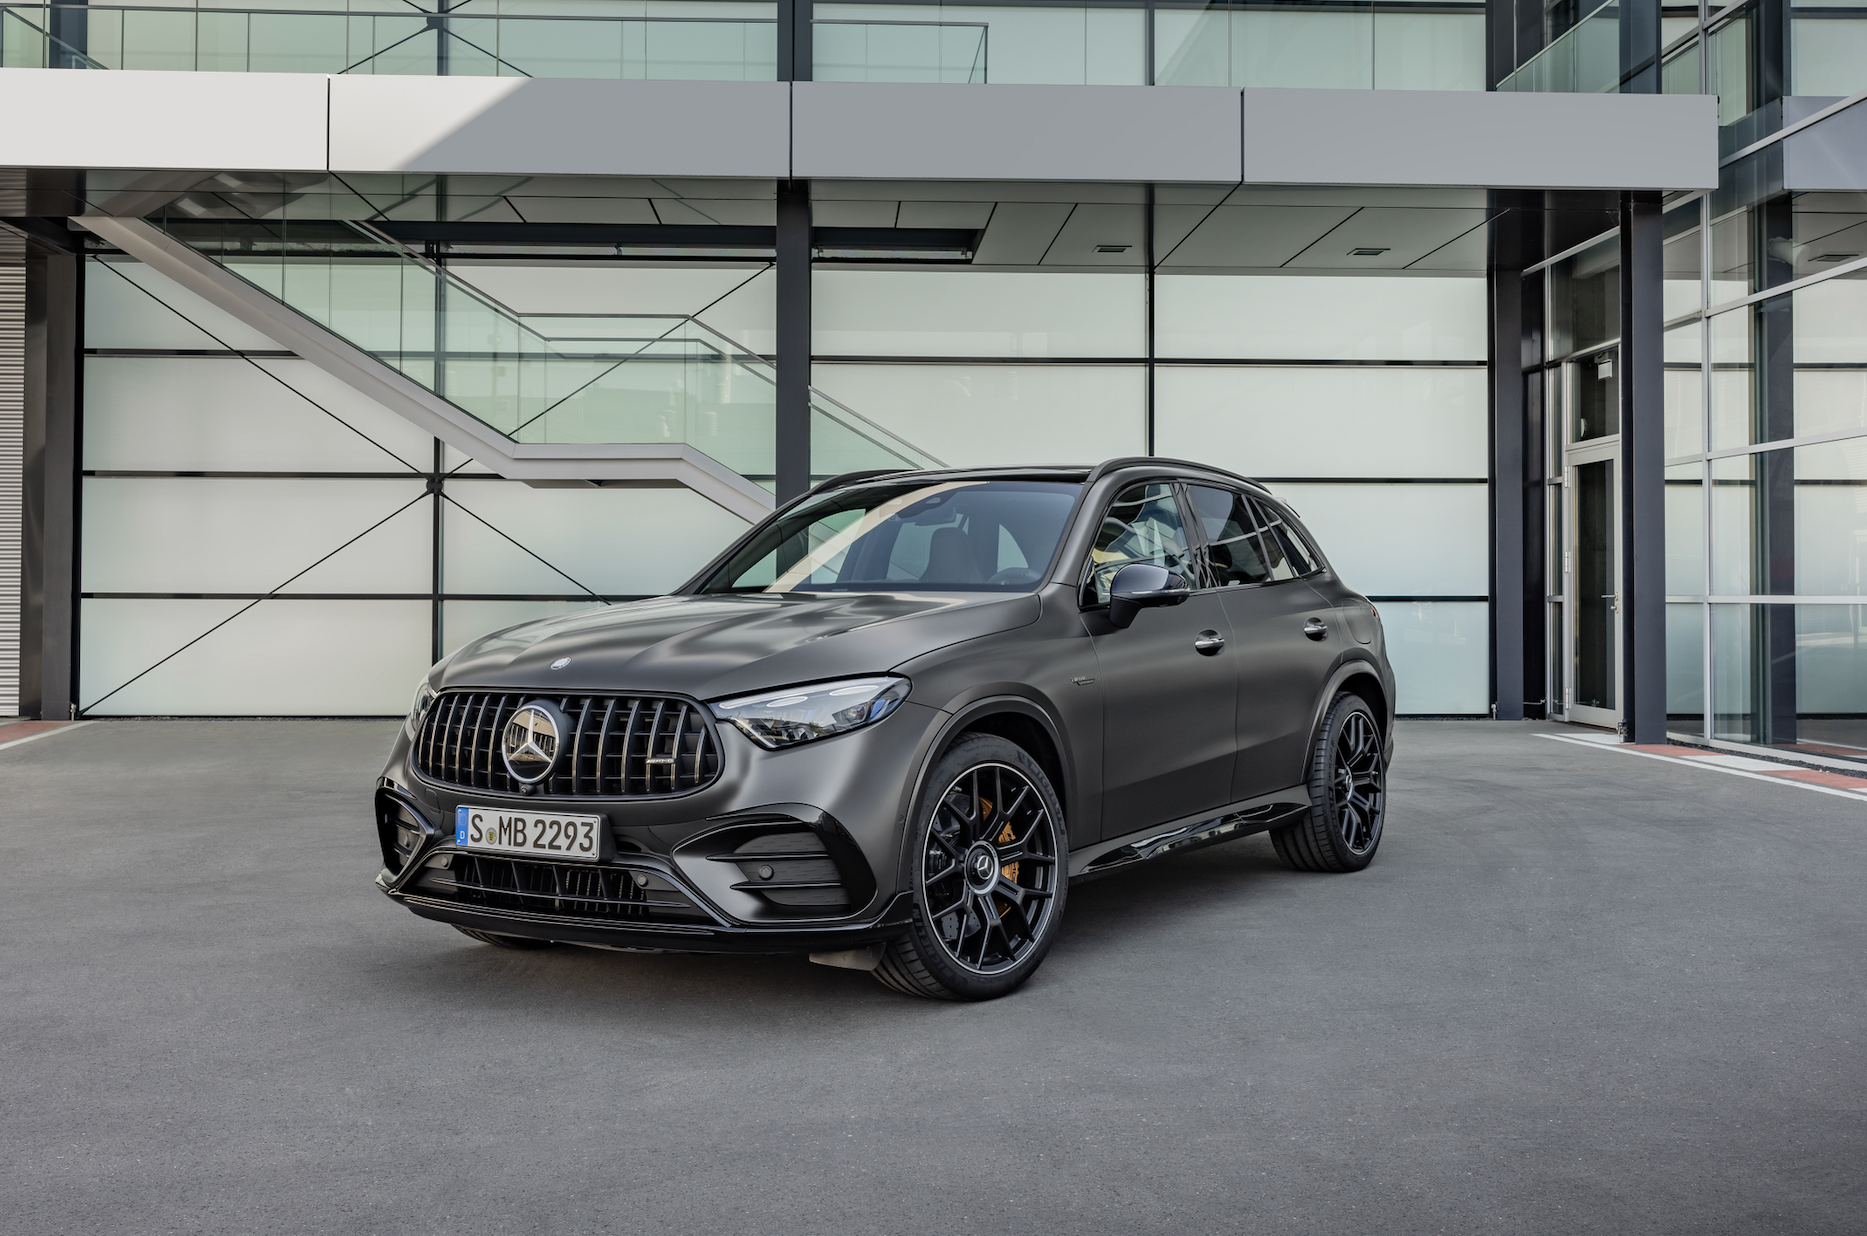 The all-new Mercedes-AMG GLC: Performance SUV in two high-performance versions